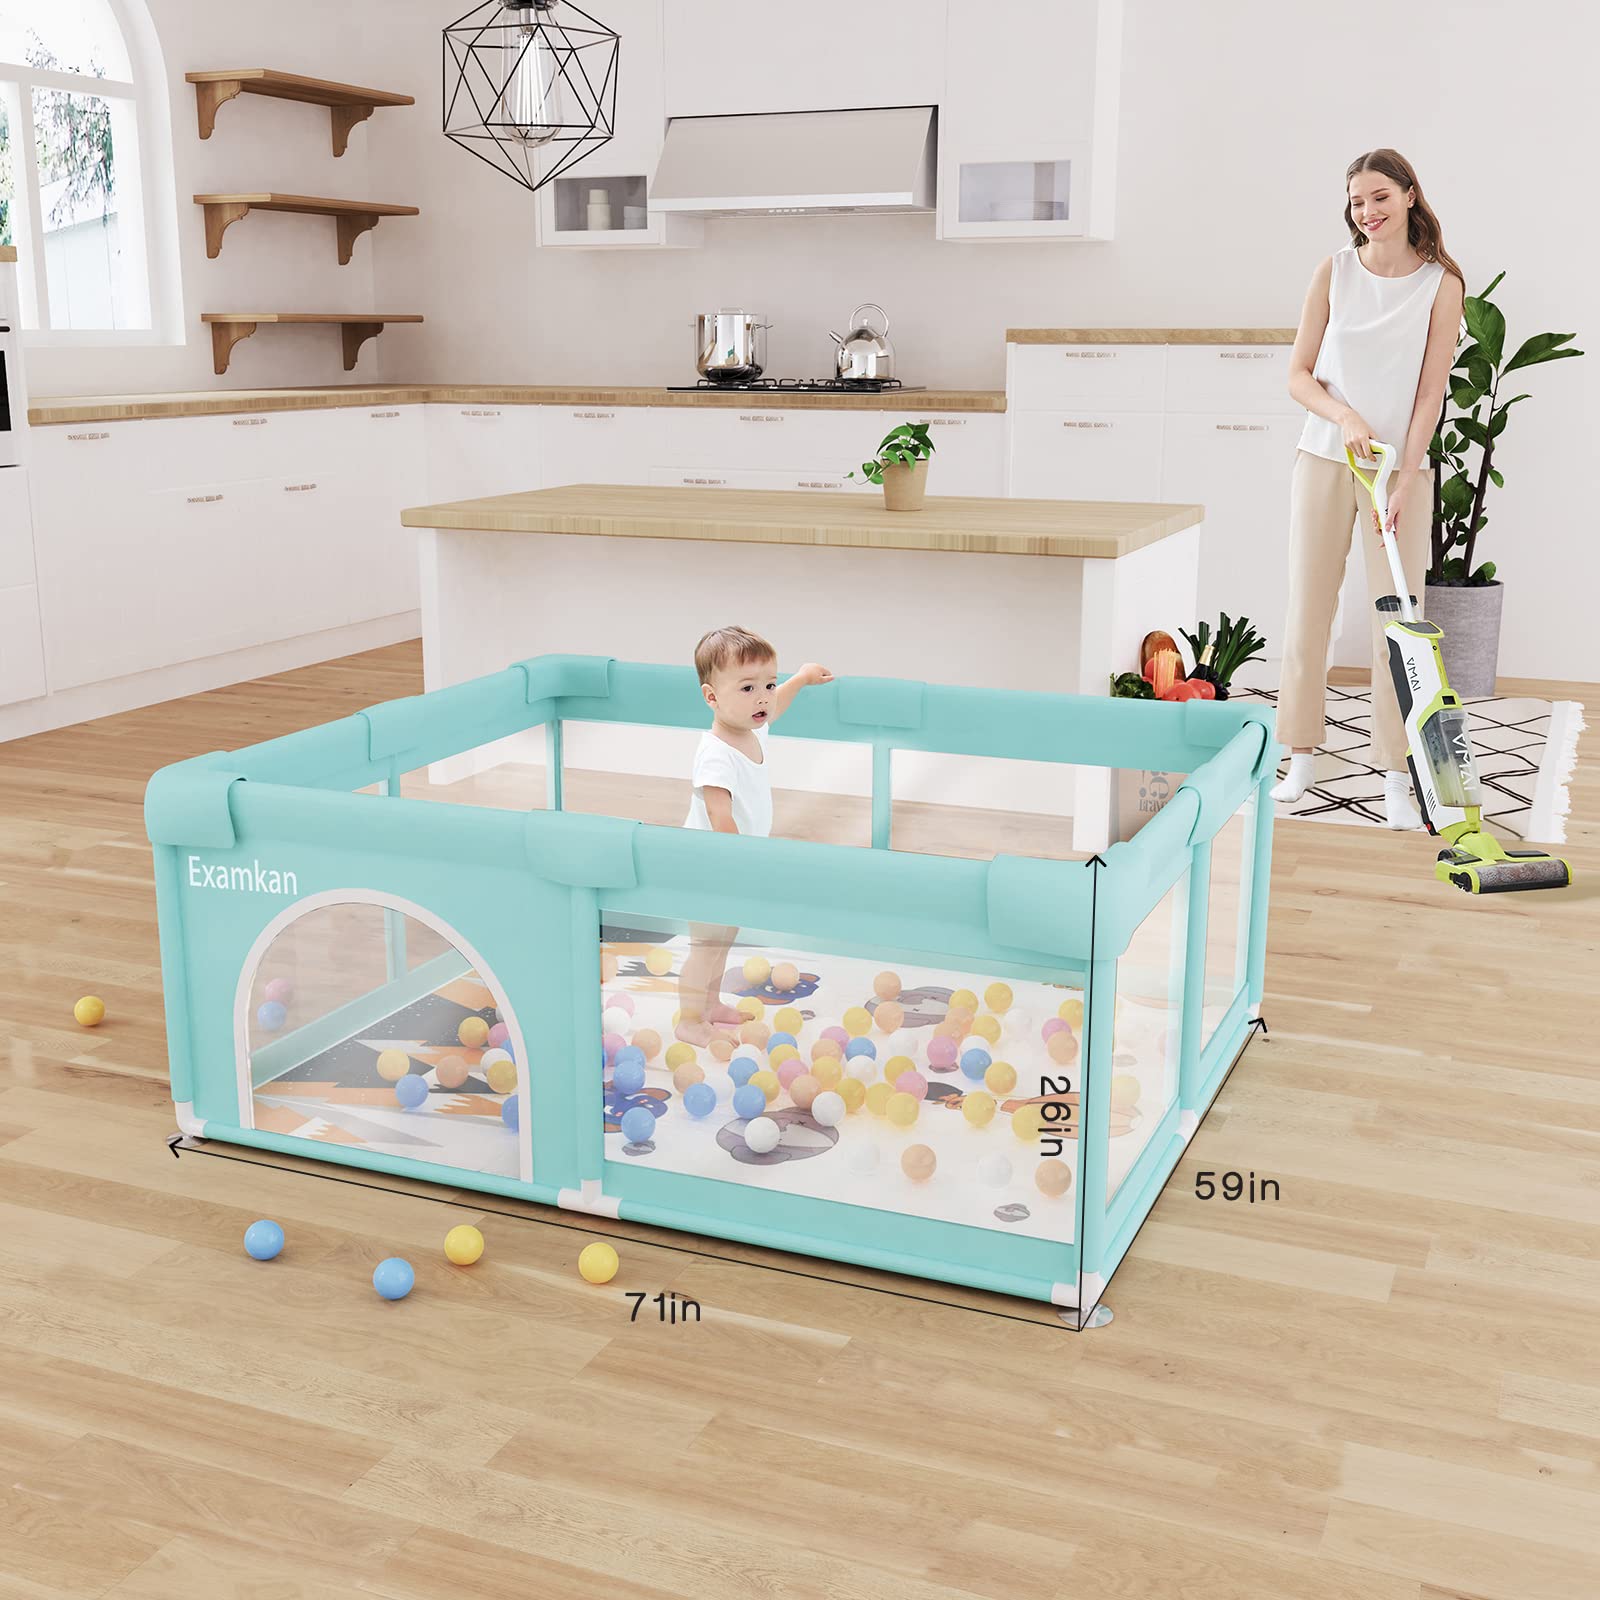 Playpen with Mat，Examkan 59X 71inch and Play Yard for Baby, Extra Large Baby Playpen with Mat,Children's Activity Center with Non-Slip Suction Cups and Zippered Doors